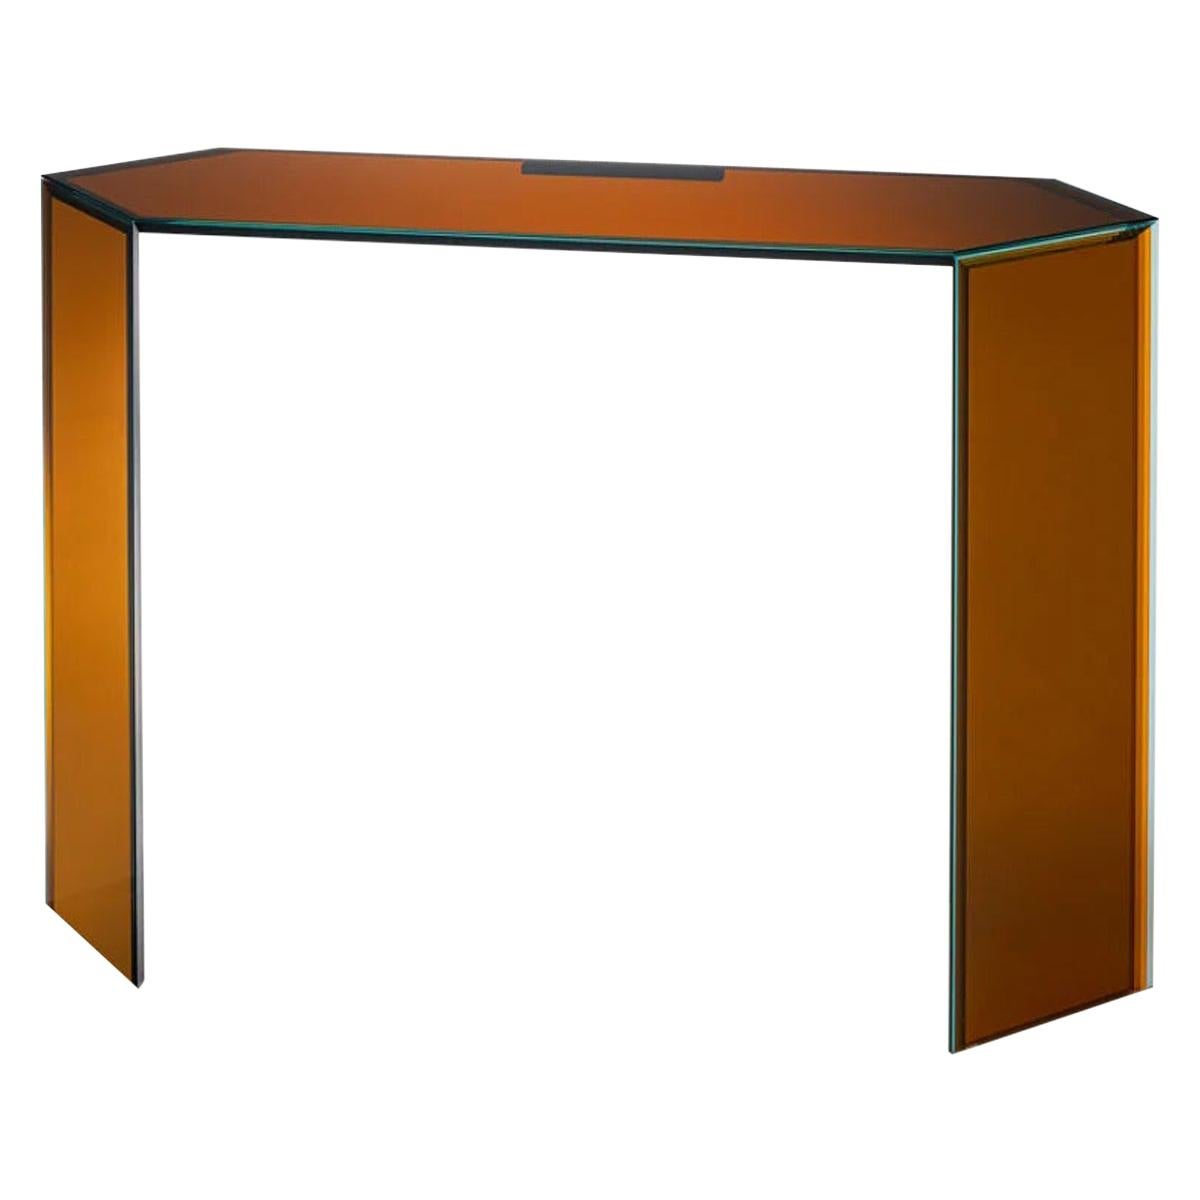 Bisel BISO3 Console Table, by Patricia Urquiola from Glas Italia